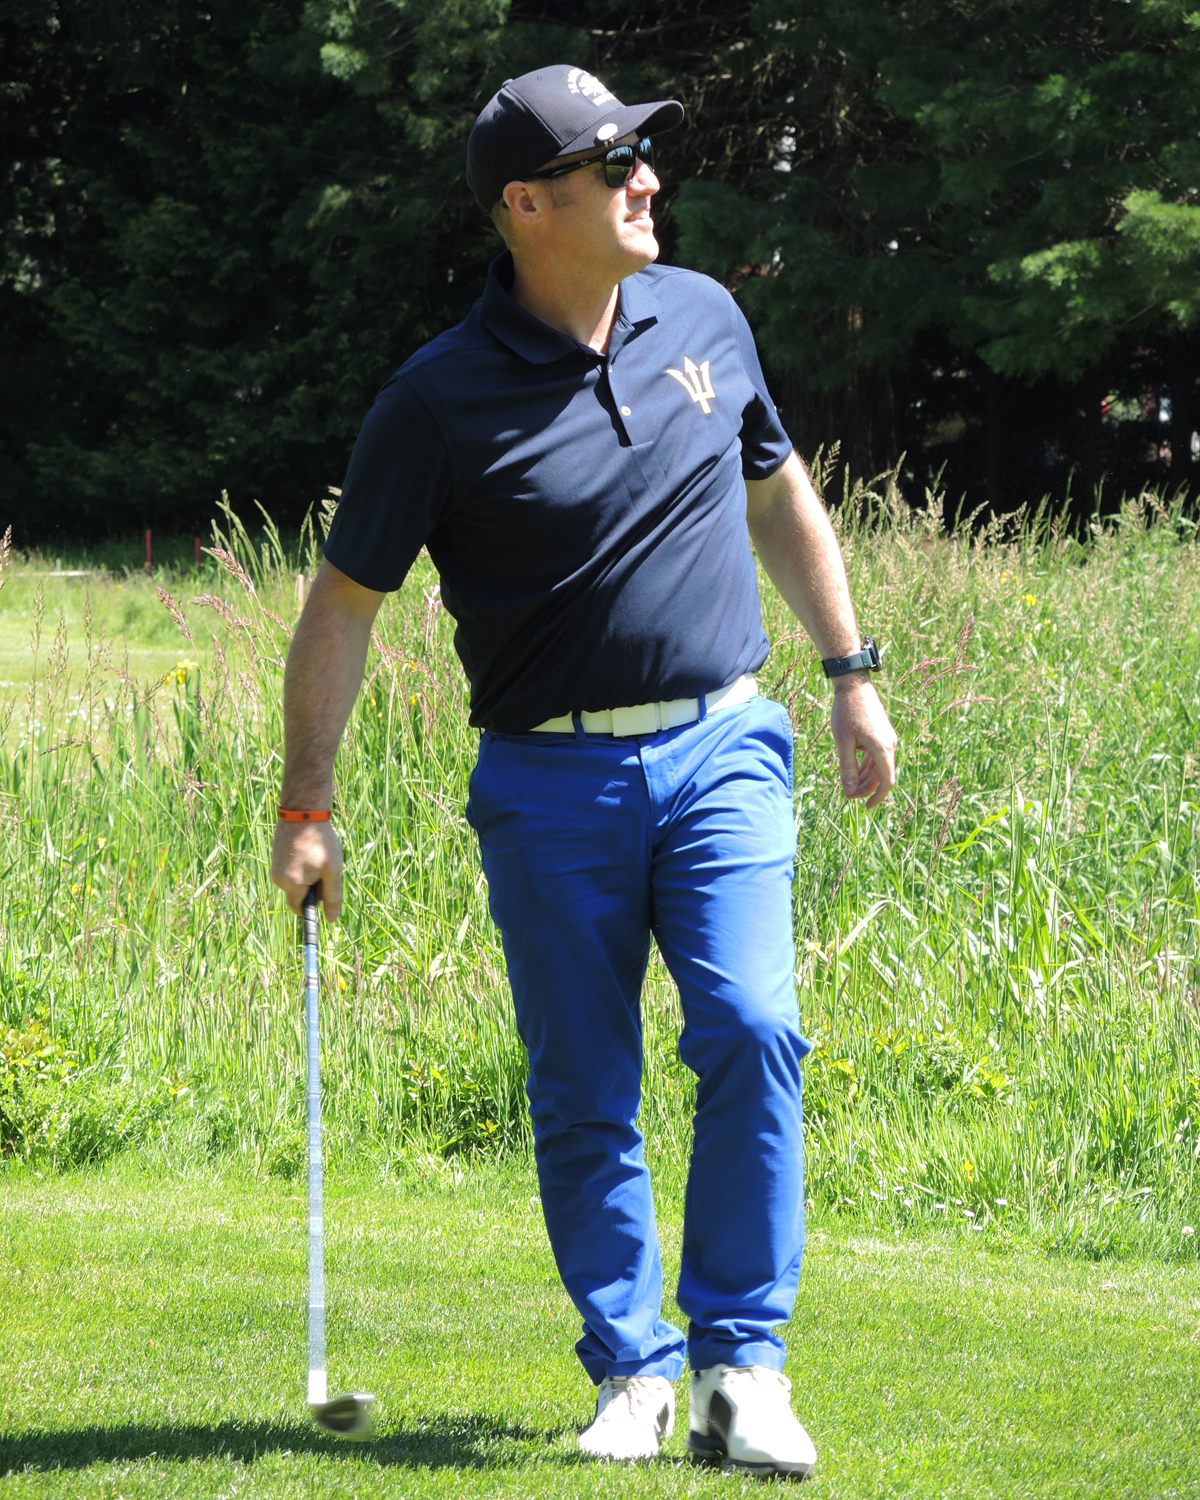 Captain (Navy) Kevin Whiteside, CFB Esquimalt Base Commander, watches his drive from the tee during the Broadmead Care Charity Golf Tournament, June 6 at the Royal Colwood Golf Club. Photos: Peter Mallett/Lookout 